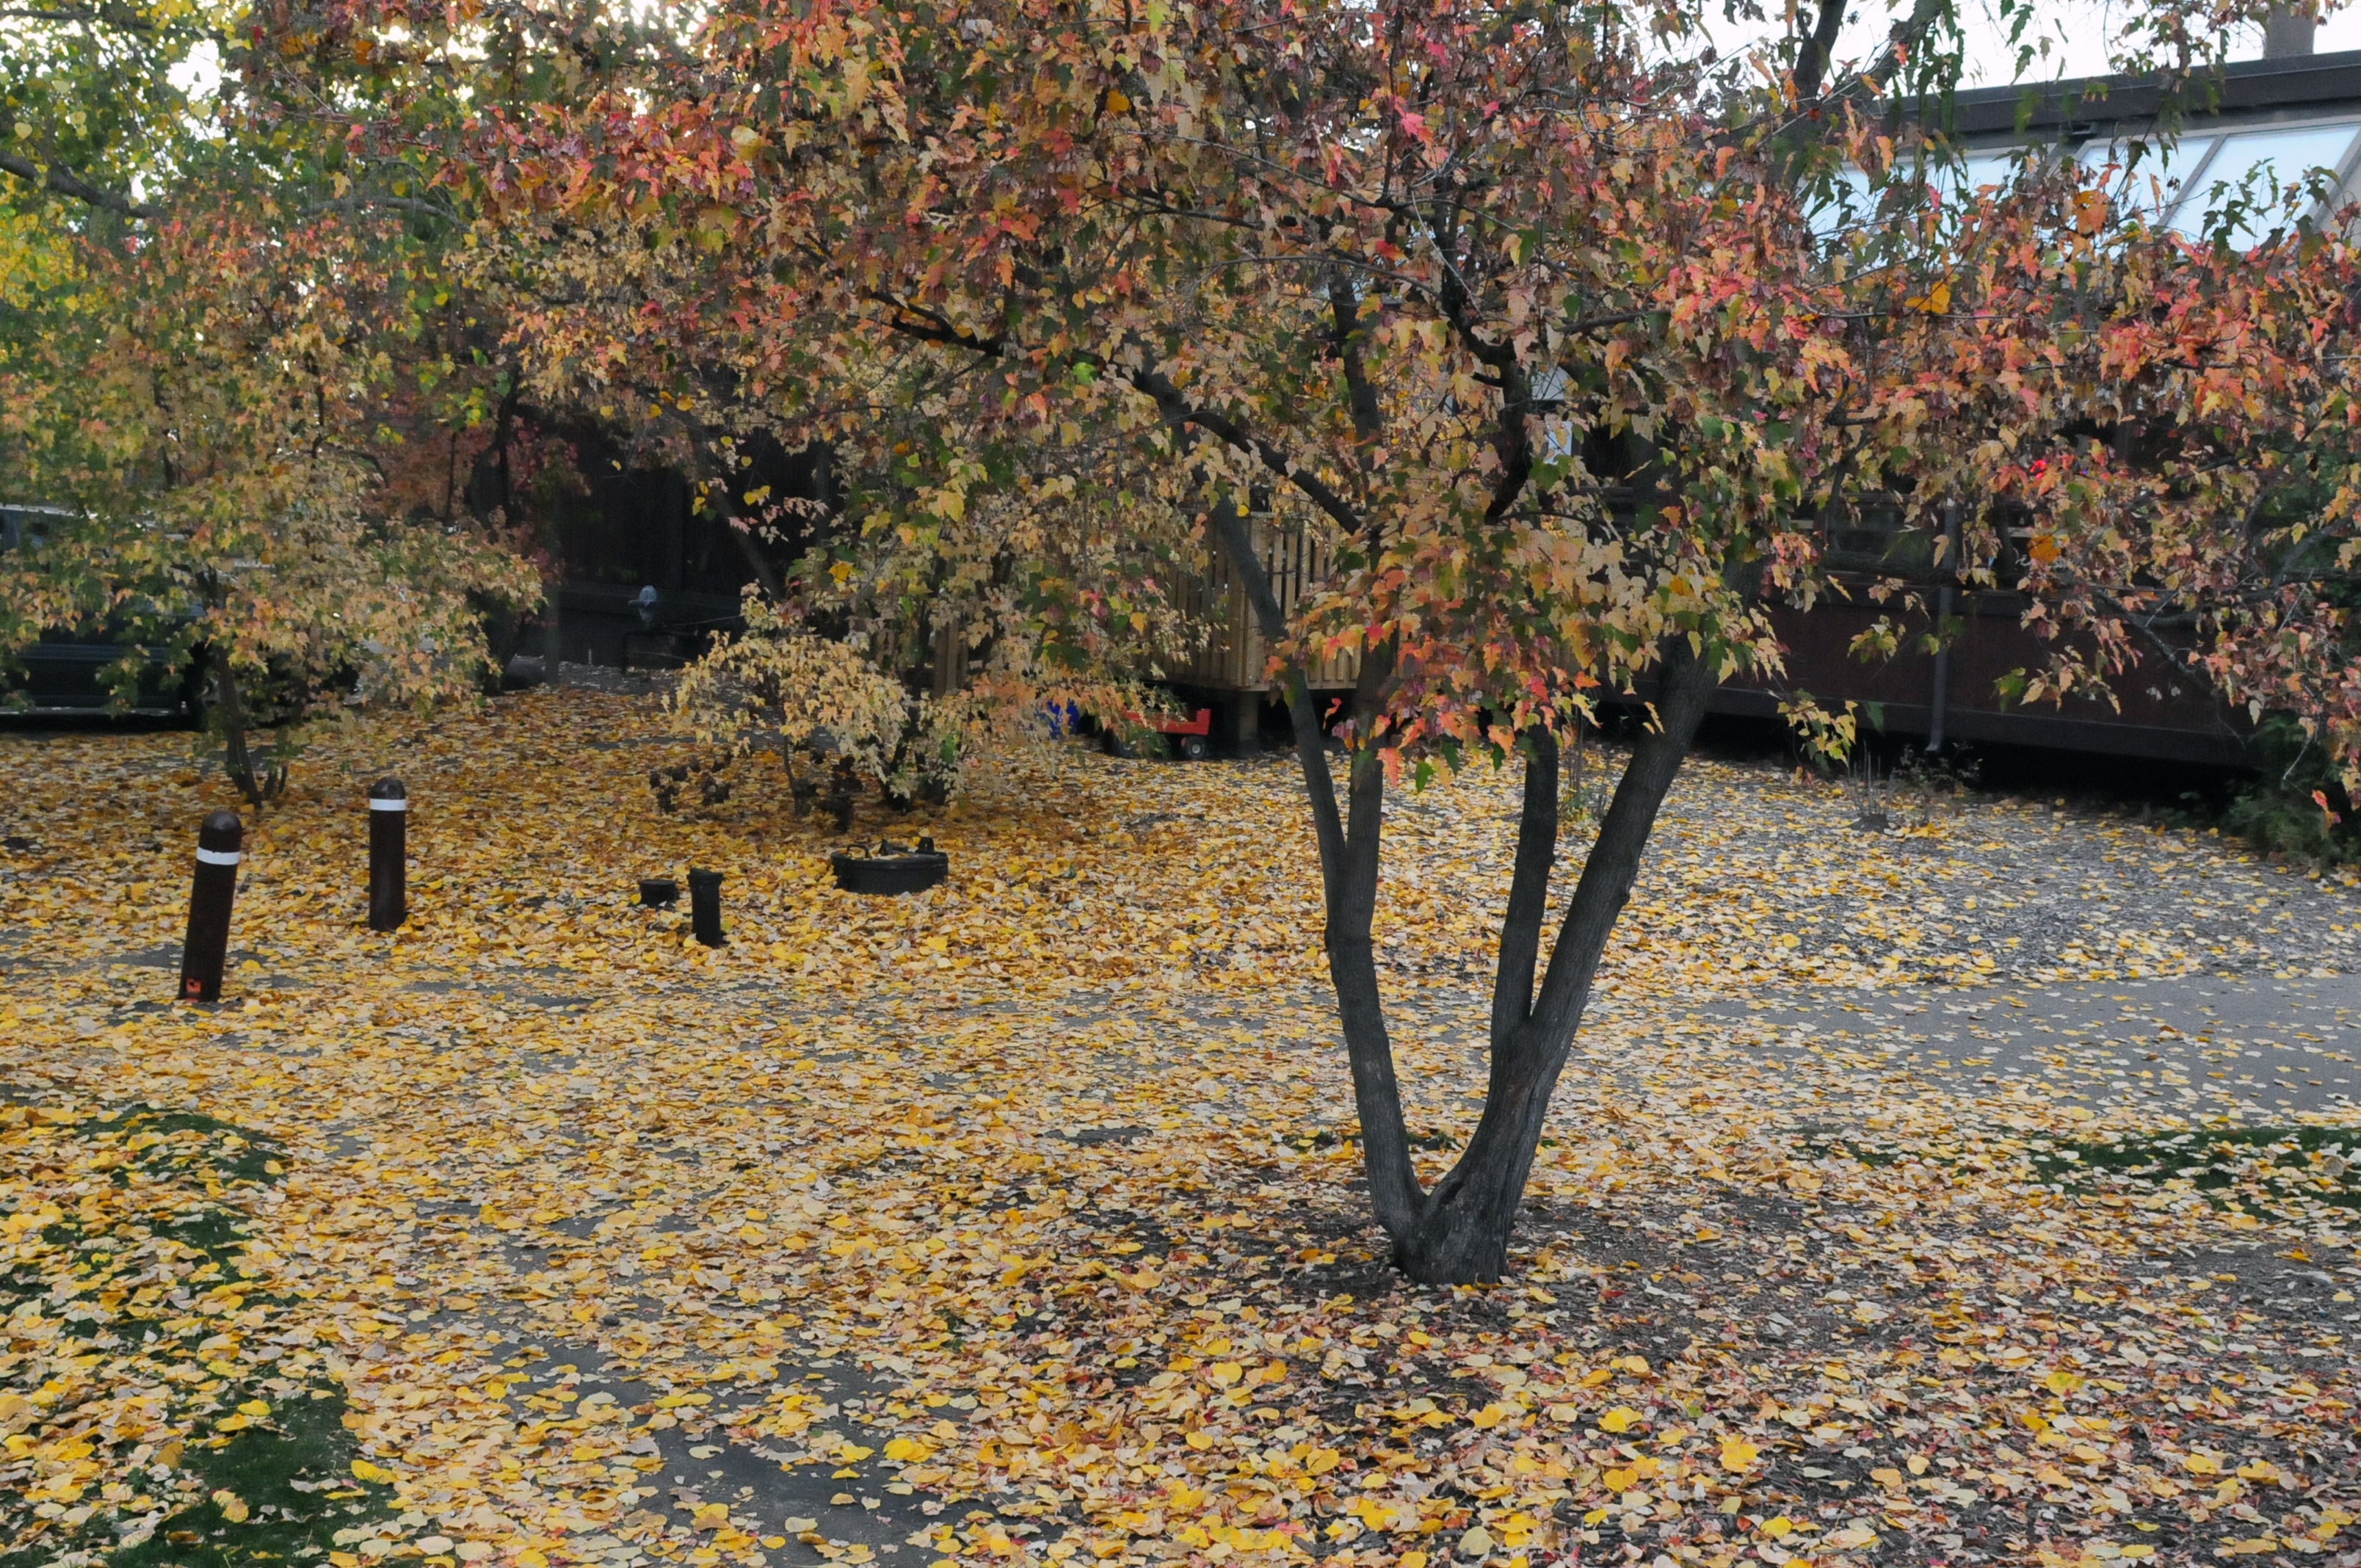 VIBRANT- Leaves begin to fall covering the ground in a sea of yellow at Heritage Ranch a good sign winter is on the way.